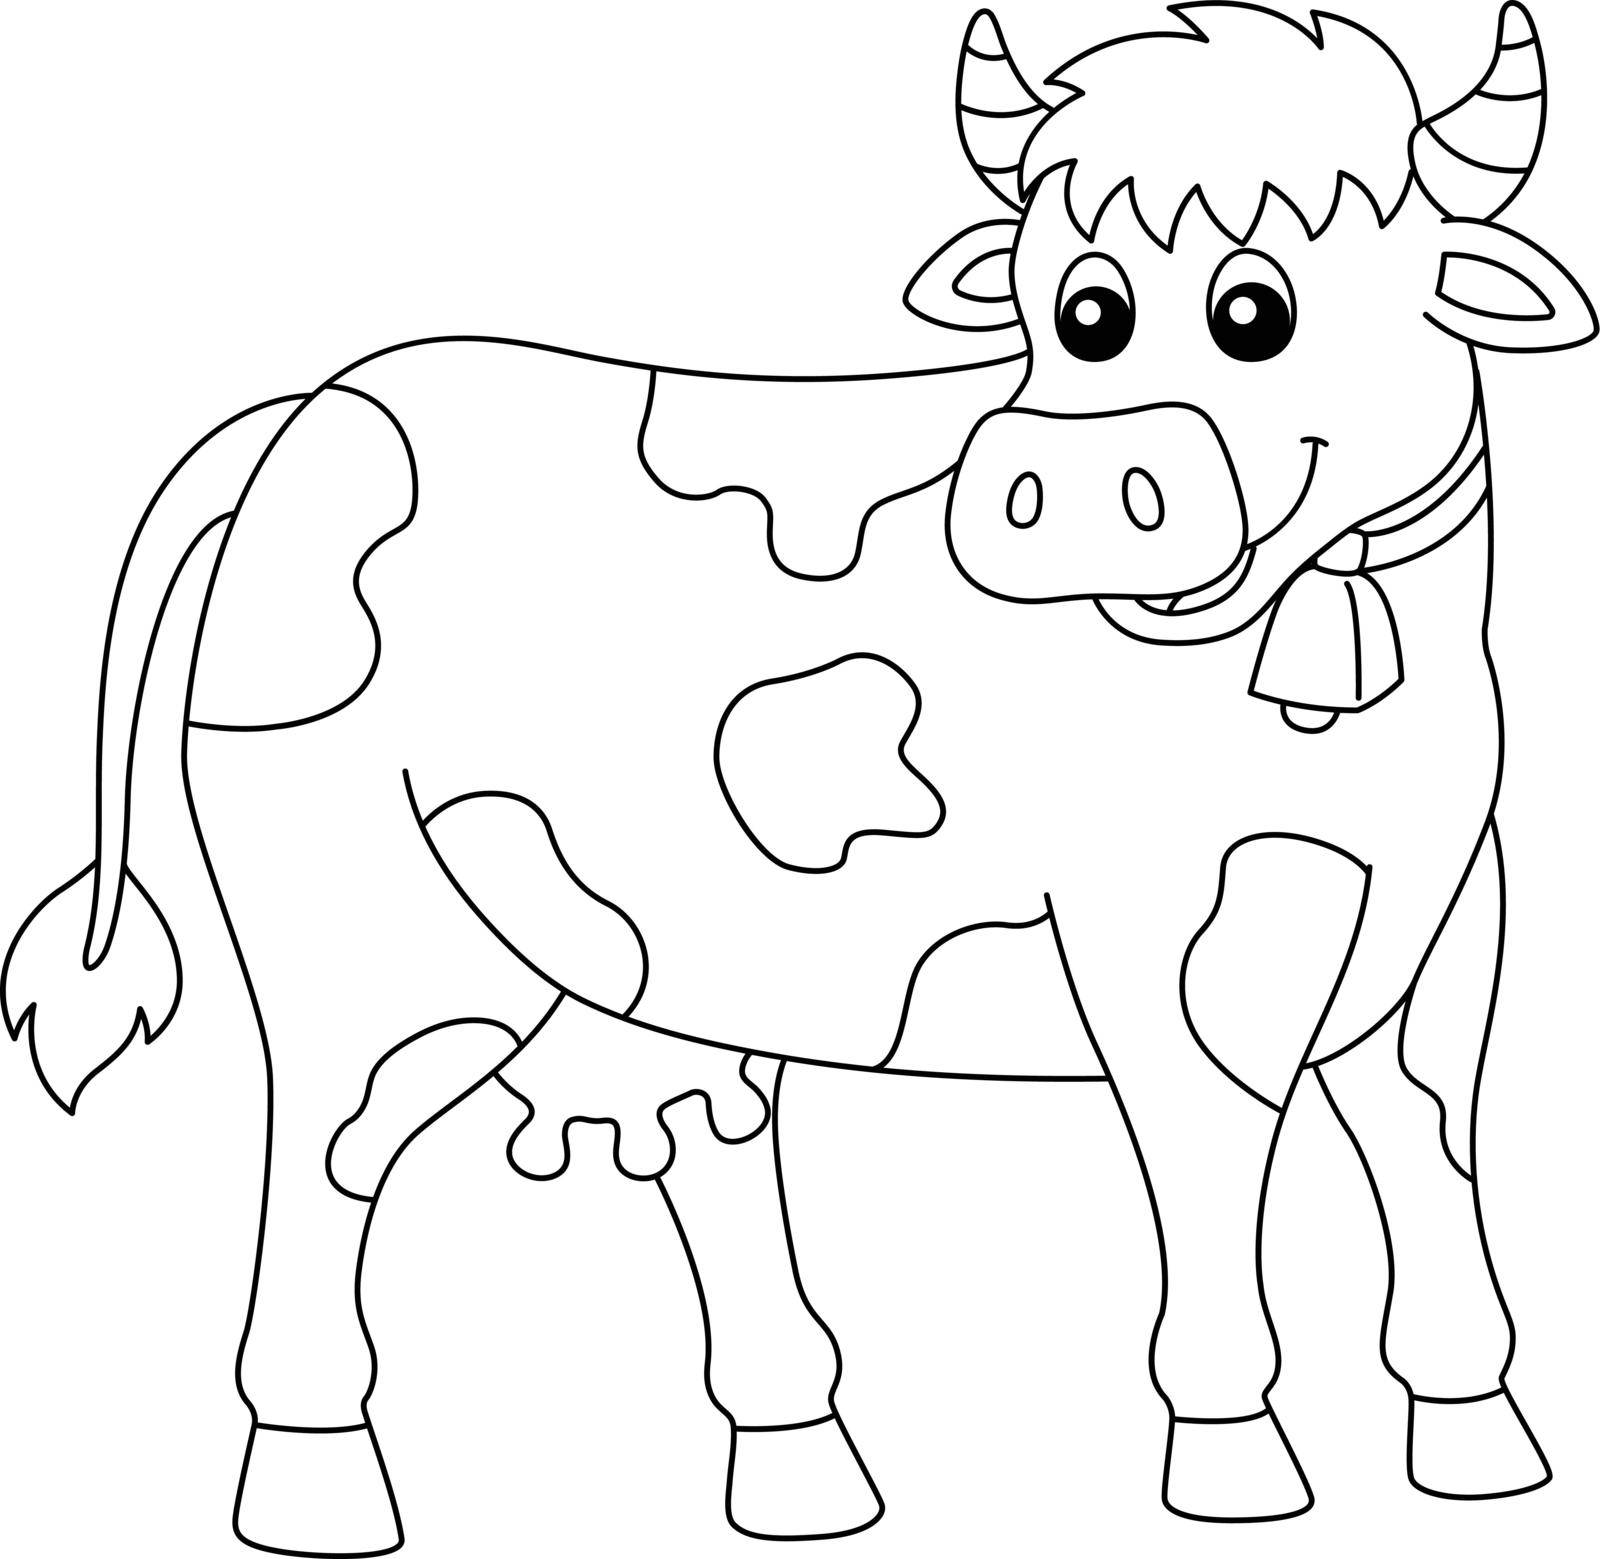 A cute and funny coloring page of a cow farm animal. Provides hours of coloring fun for children. To color, this page is very easy. Suitable for little kids and toddlers.